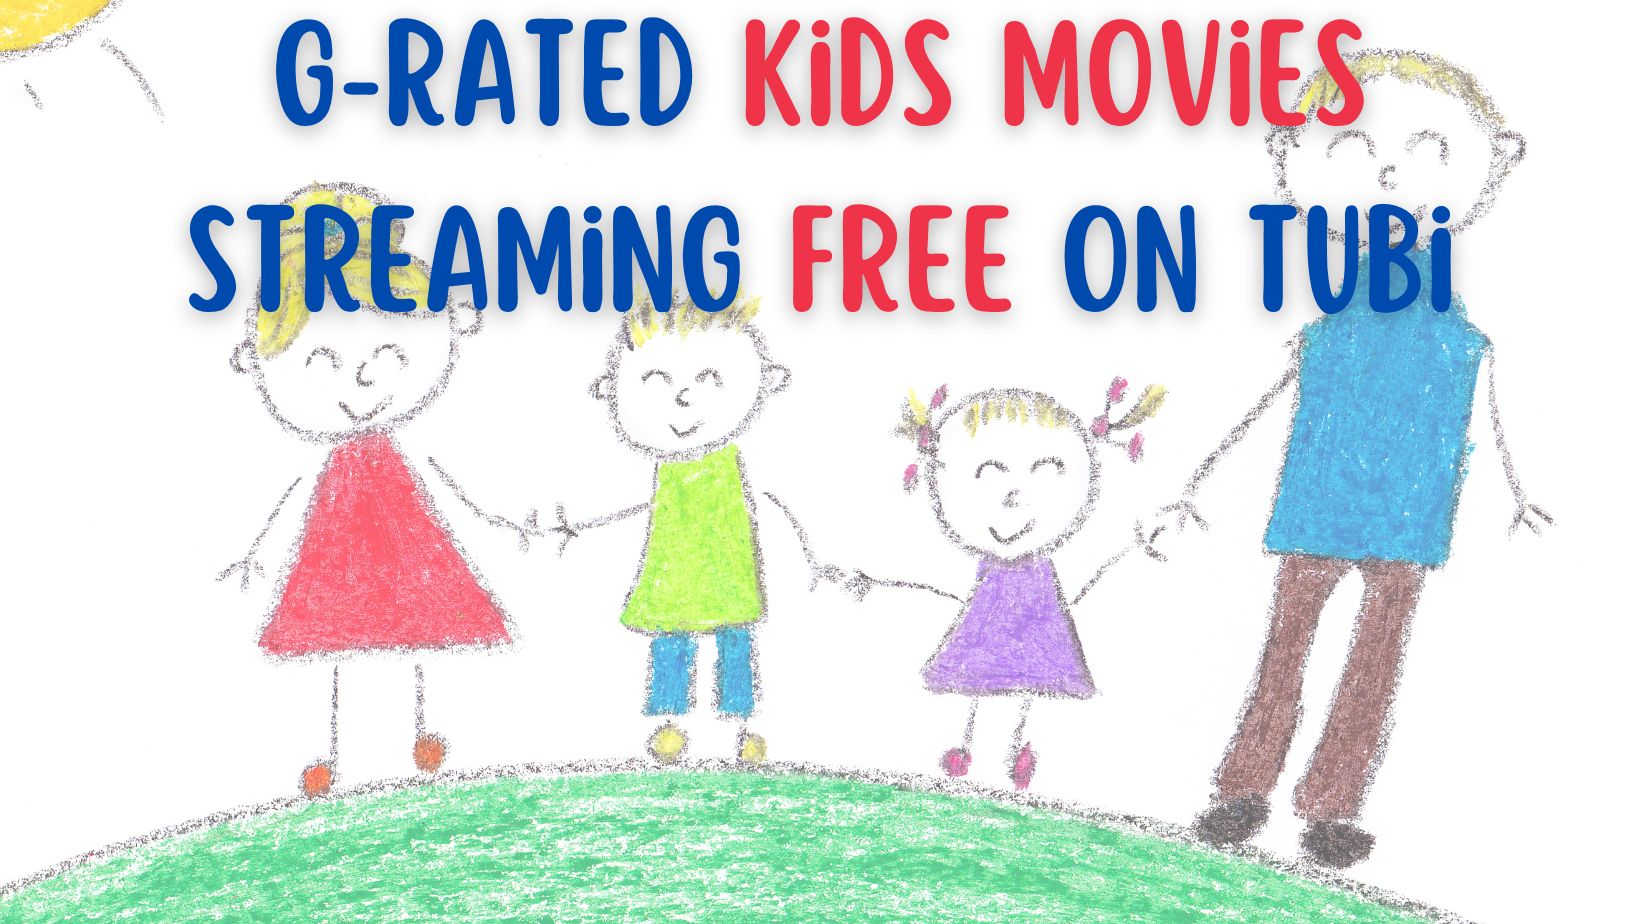 g-rated kids movies streaming free on tubi